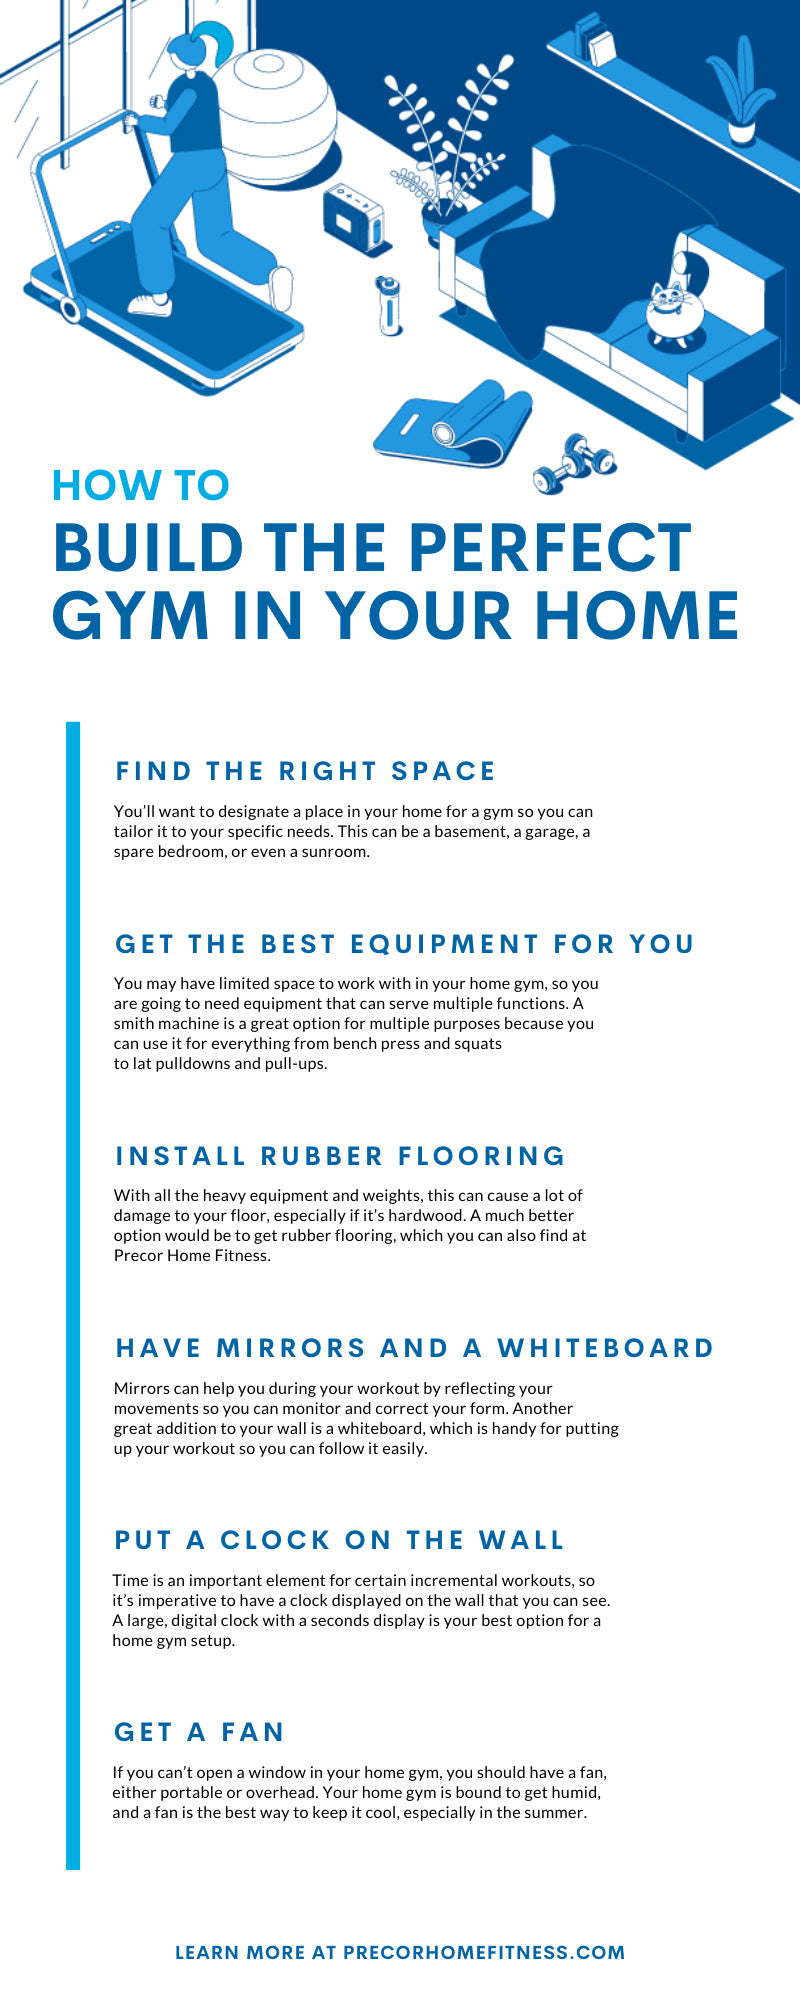 How to Build the Perfect Gym in Your Home